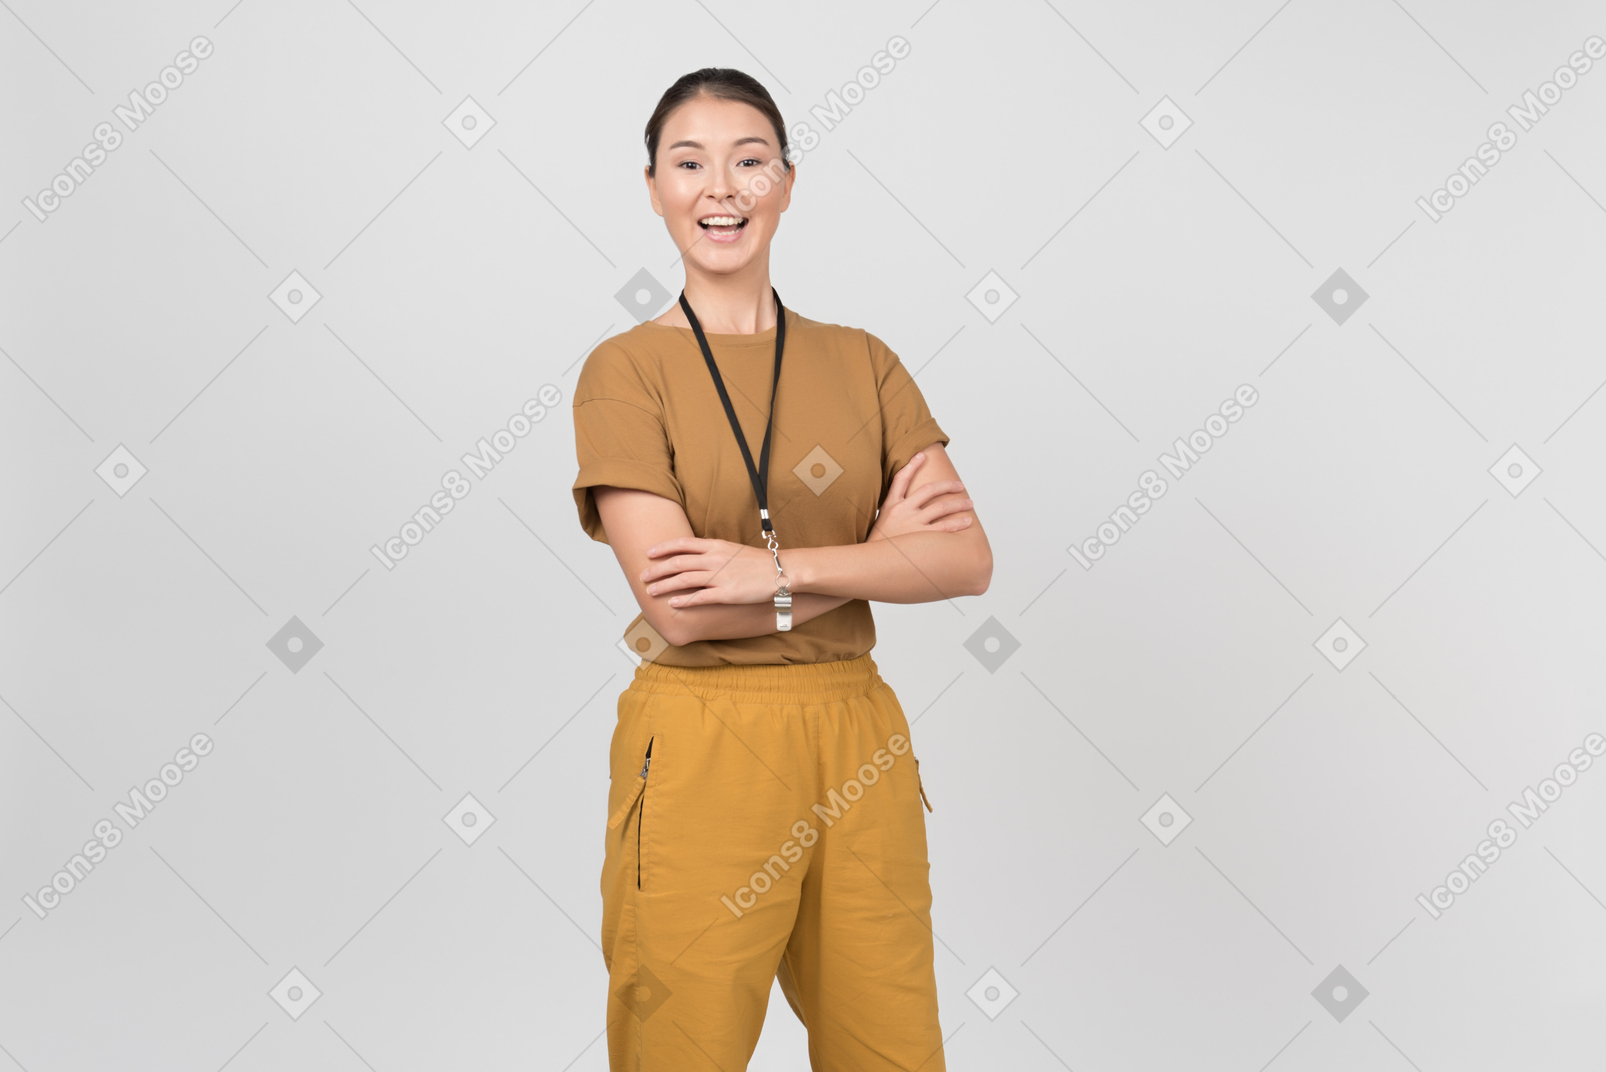 Young smiling pe teacher holding her hands crossed